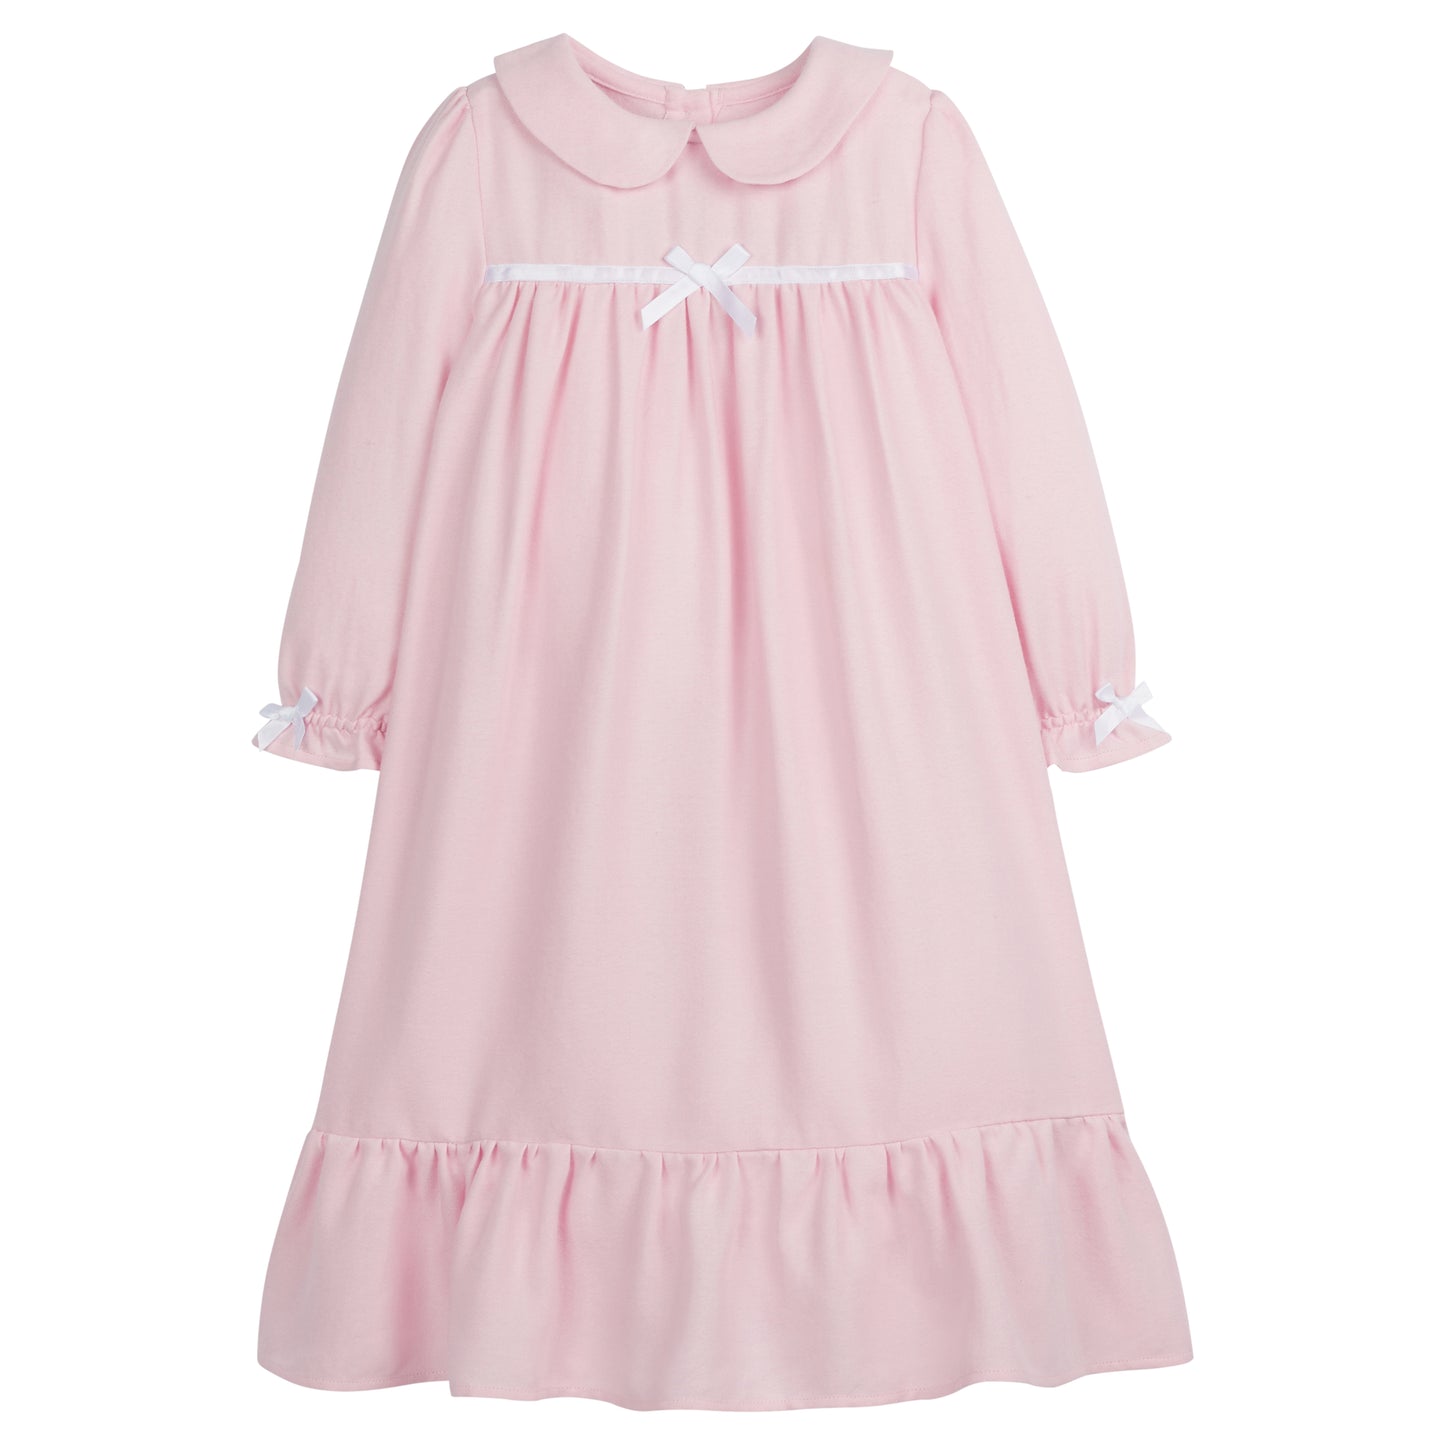 Classic Nightgown - Light Pink